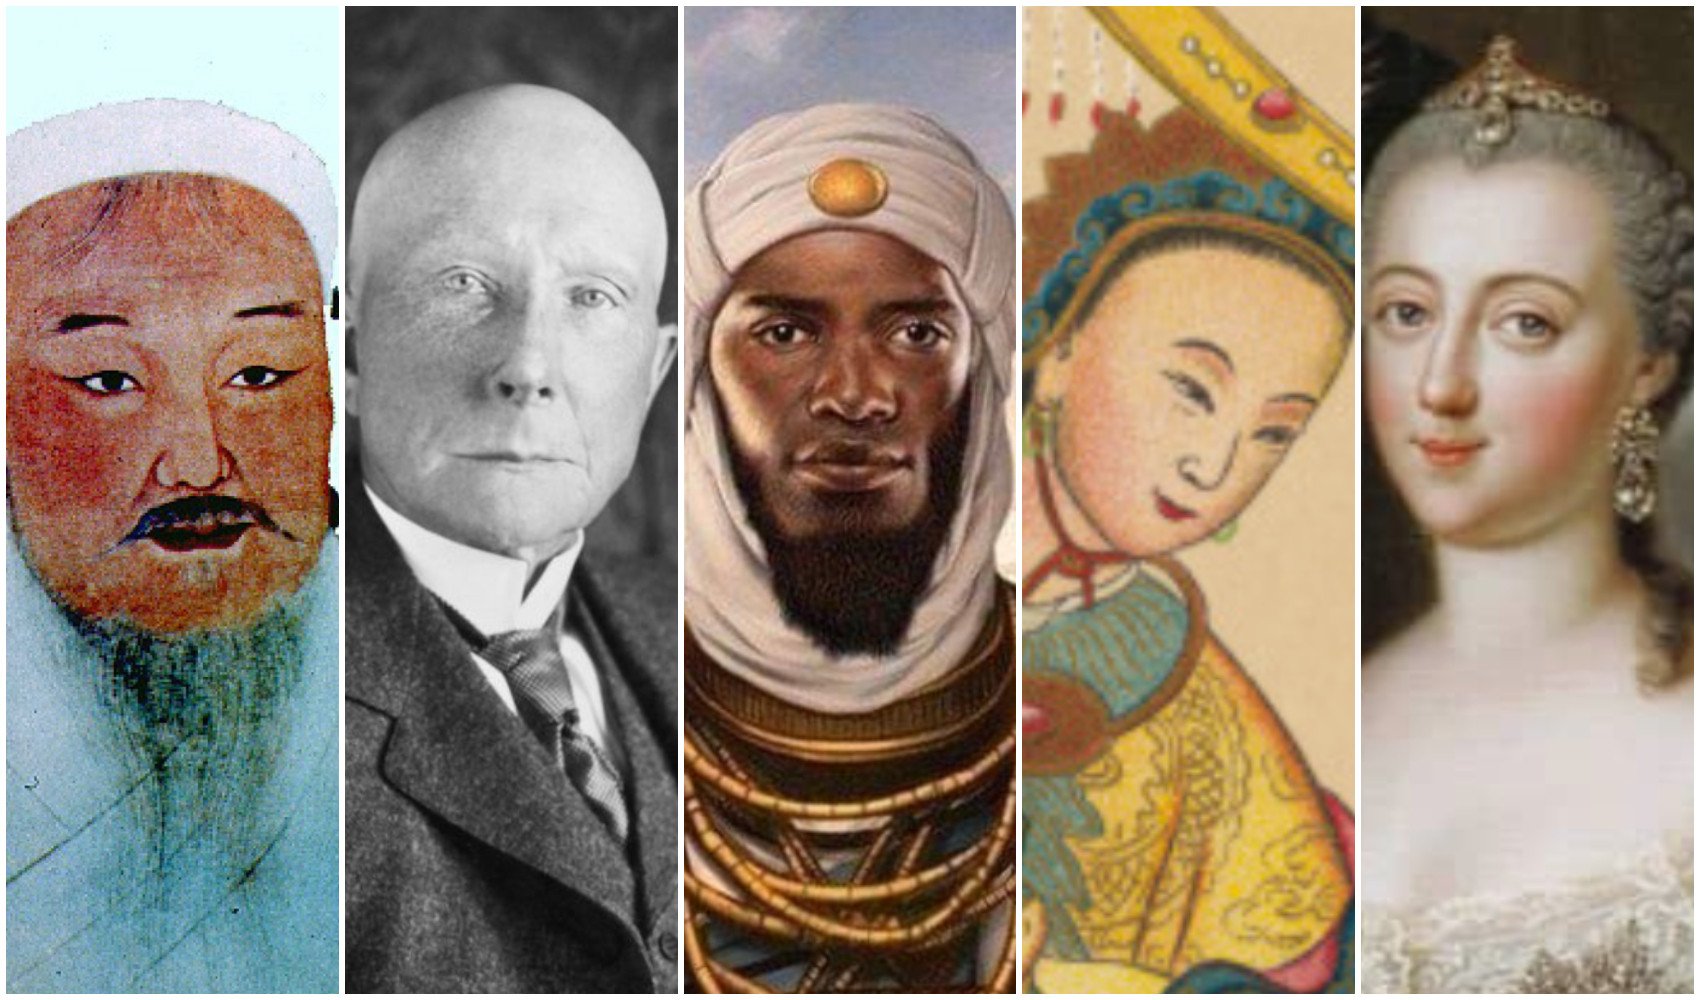 Genghis Khan, John D. Rockefeller, Mansa Musa, Empress Wu and Catherine the Great all had immense wealth. Photos: Handout; Shutterstock; @Dr_TheHistories/Twitter; Mary Evans Picture Library; @catherinee_thee_greatt/Instagram